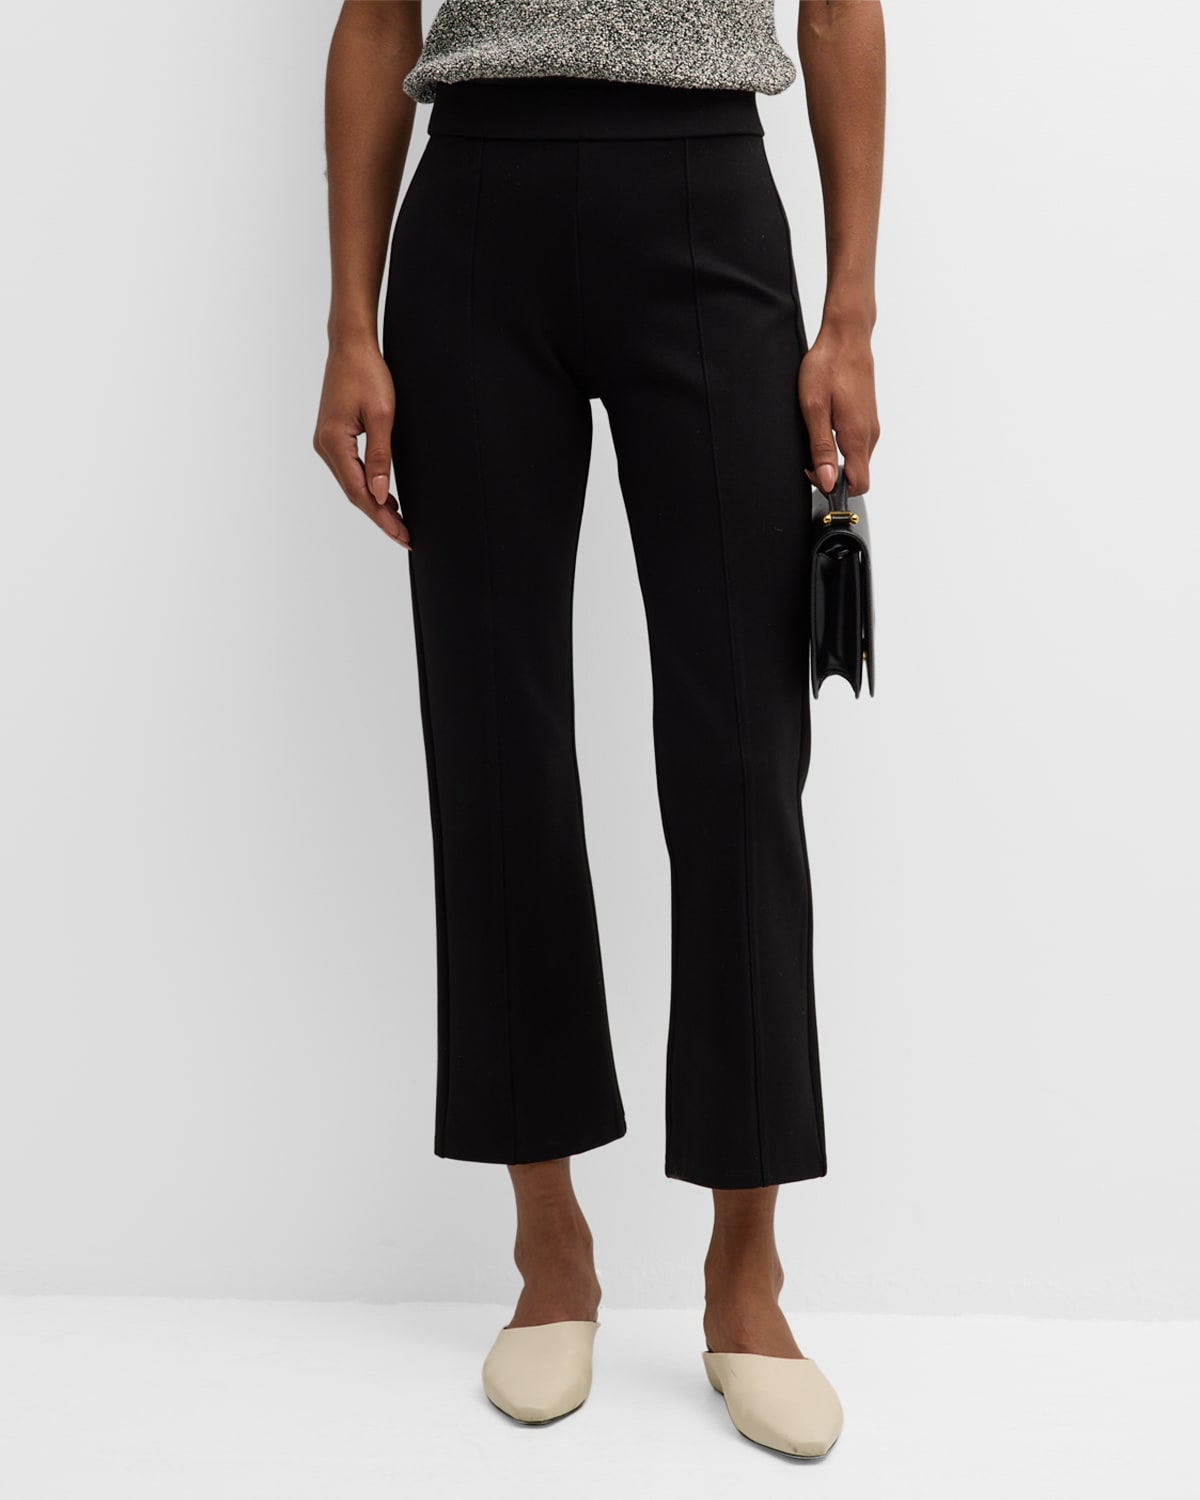 TORY BURCH CROPPED PINTUCK FLARE PANTS